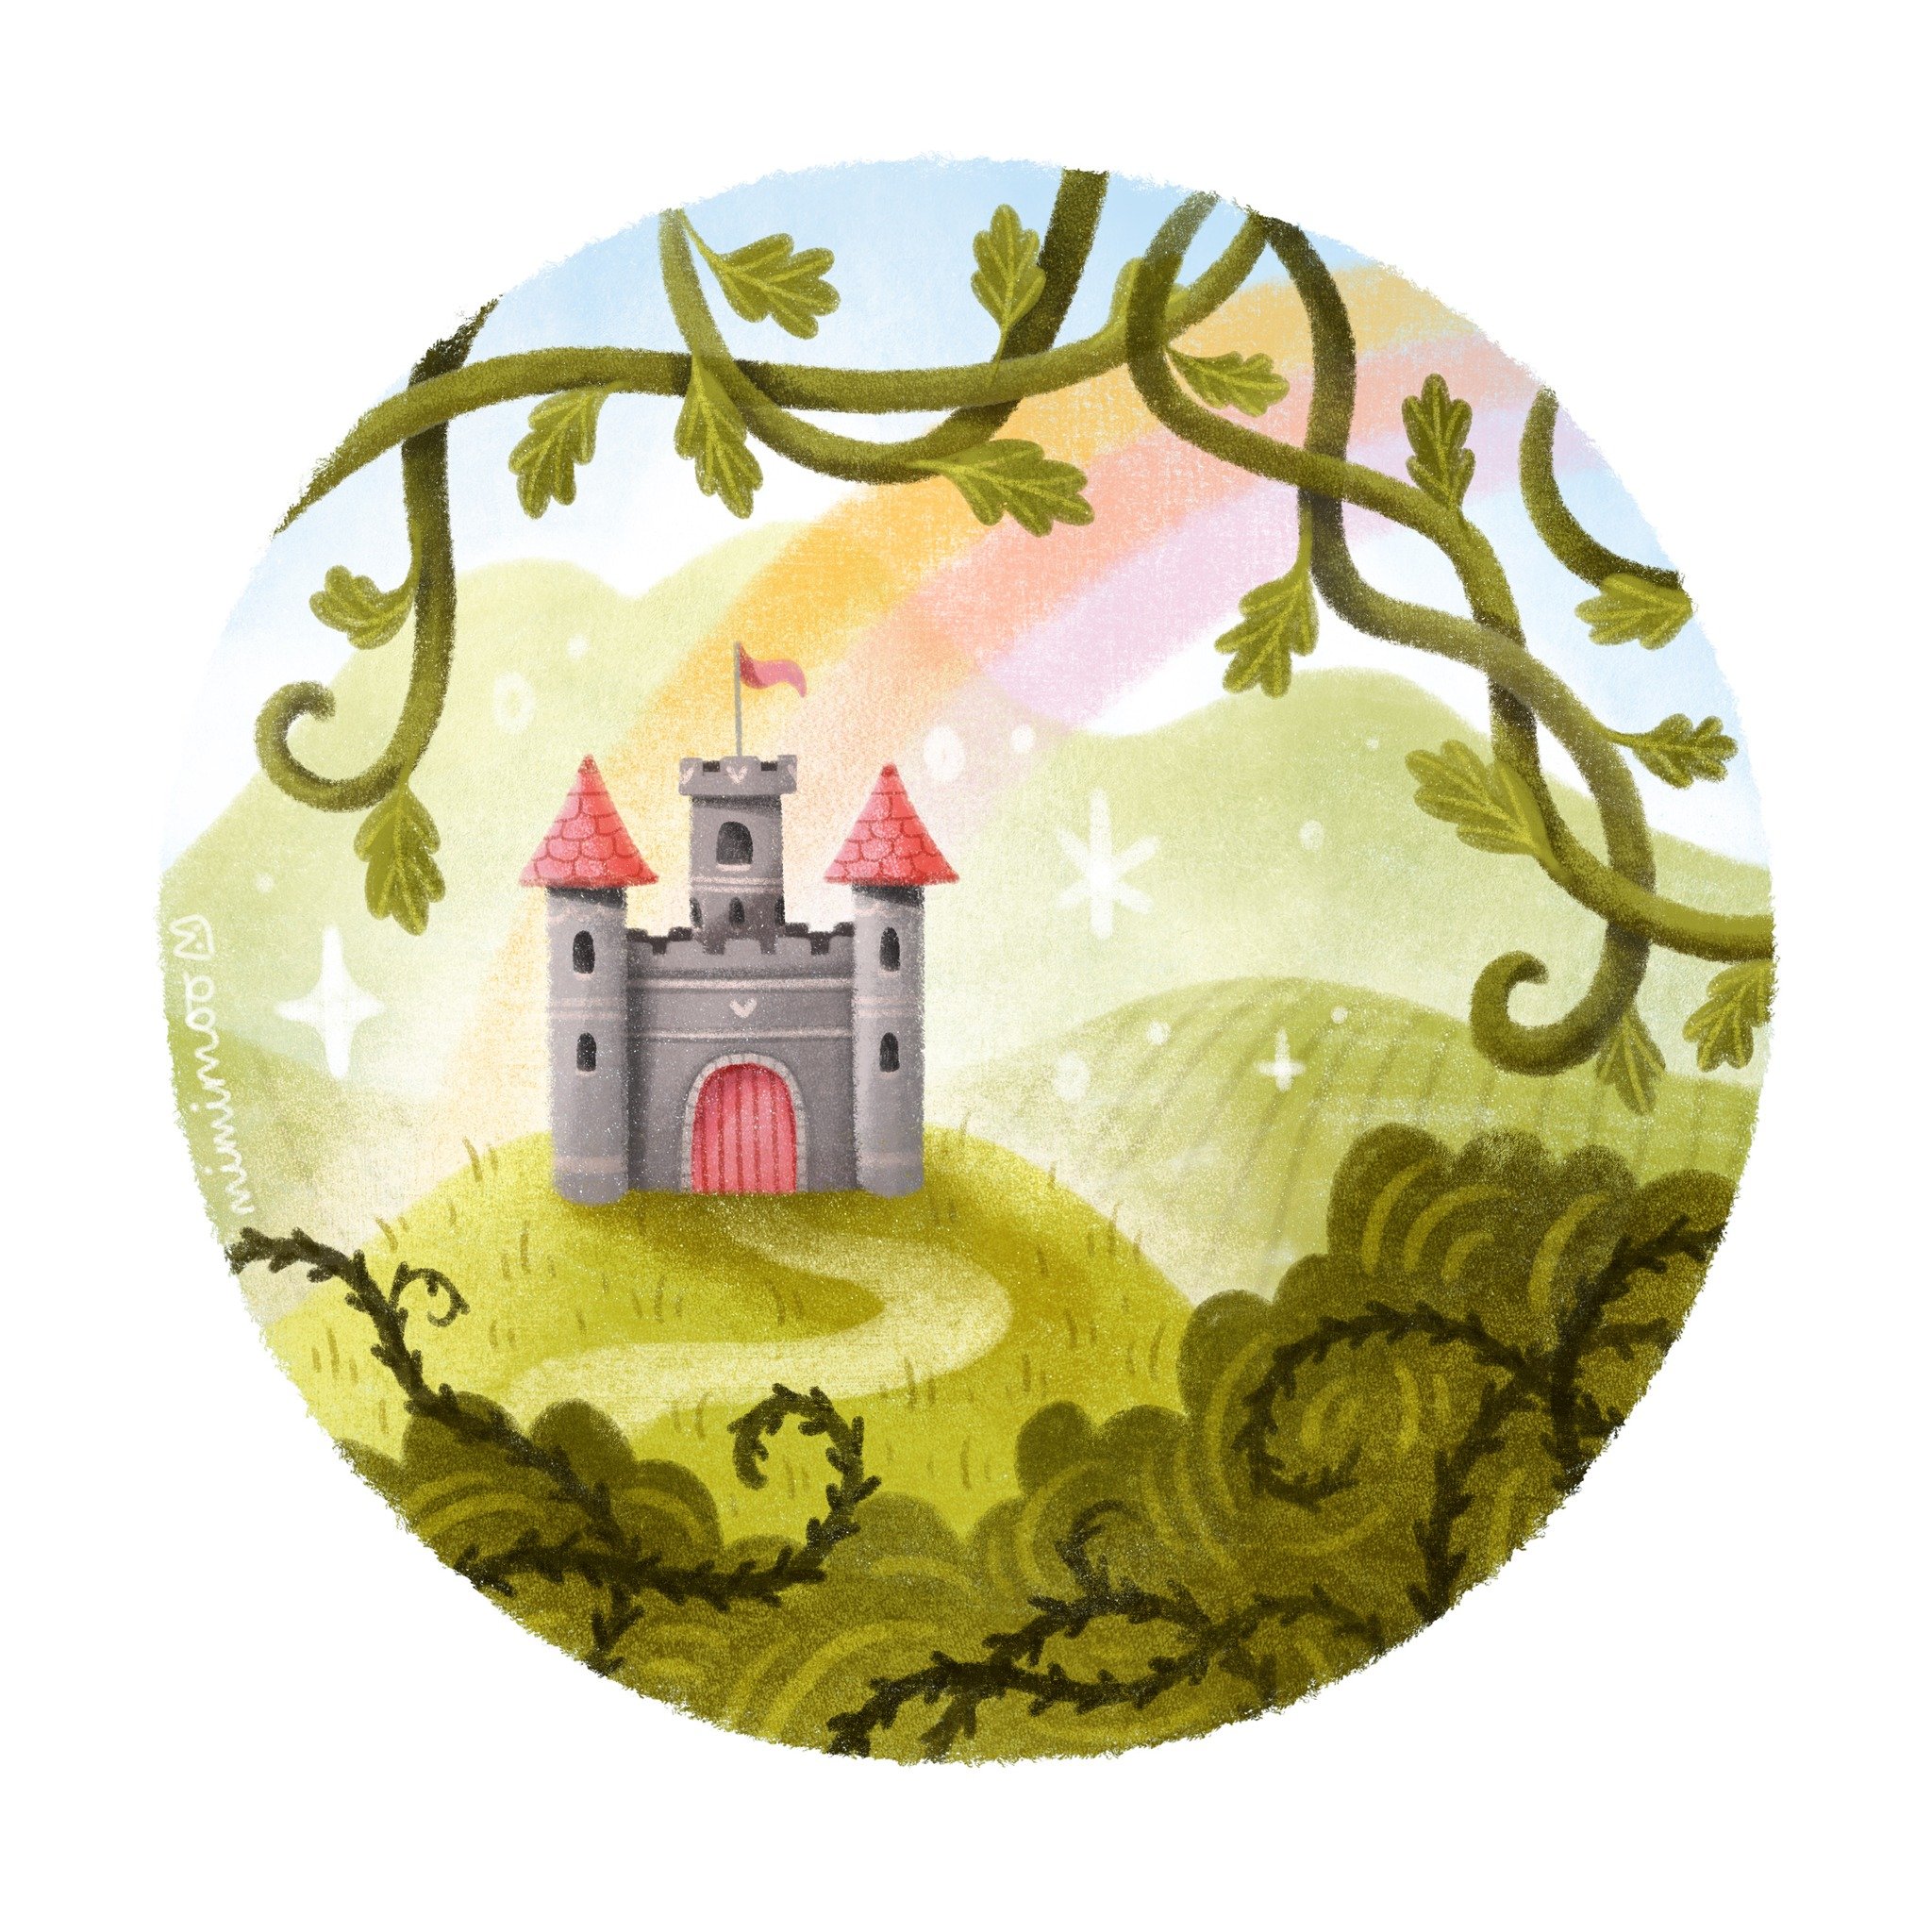 Brb, moving into this fairytale castle 😍✨🌈 Let me know if you'd like to join me!

Brushes I used (from my brush packs):
🌷 Mimi Simple Sketching for initial sketch
🌷 Mimi Softy Sketchy Texture, Texture Pencil and Big Fuzzy Brush for colouring shap